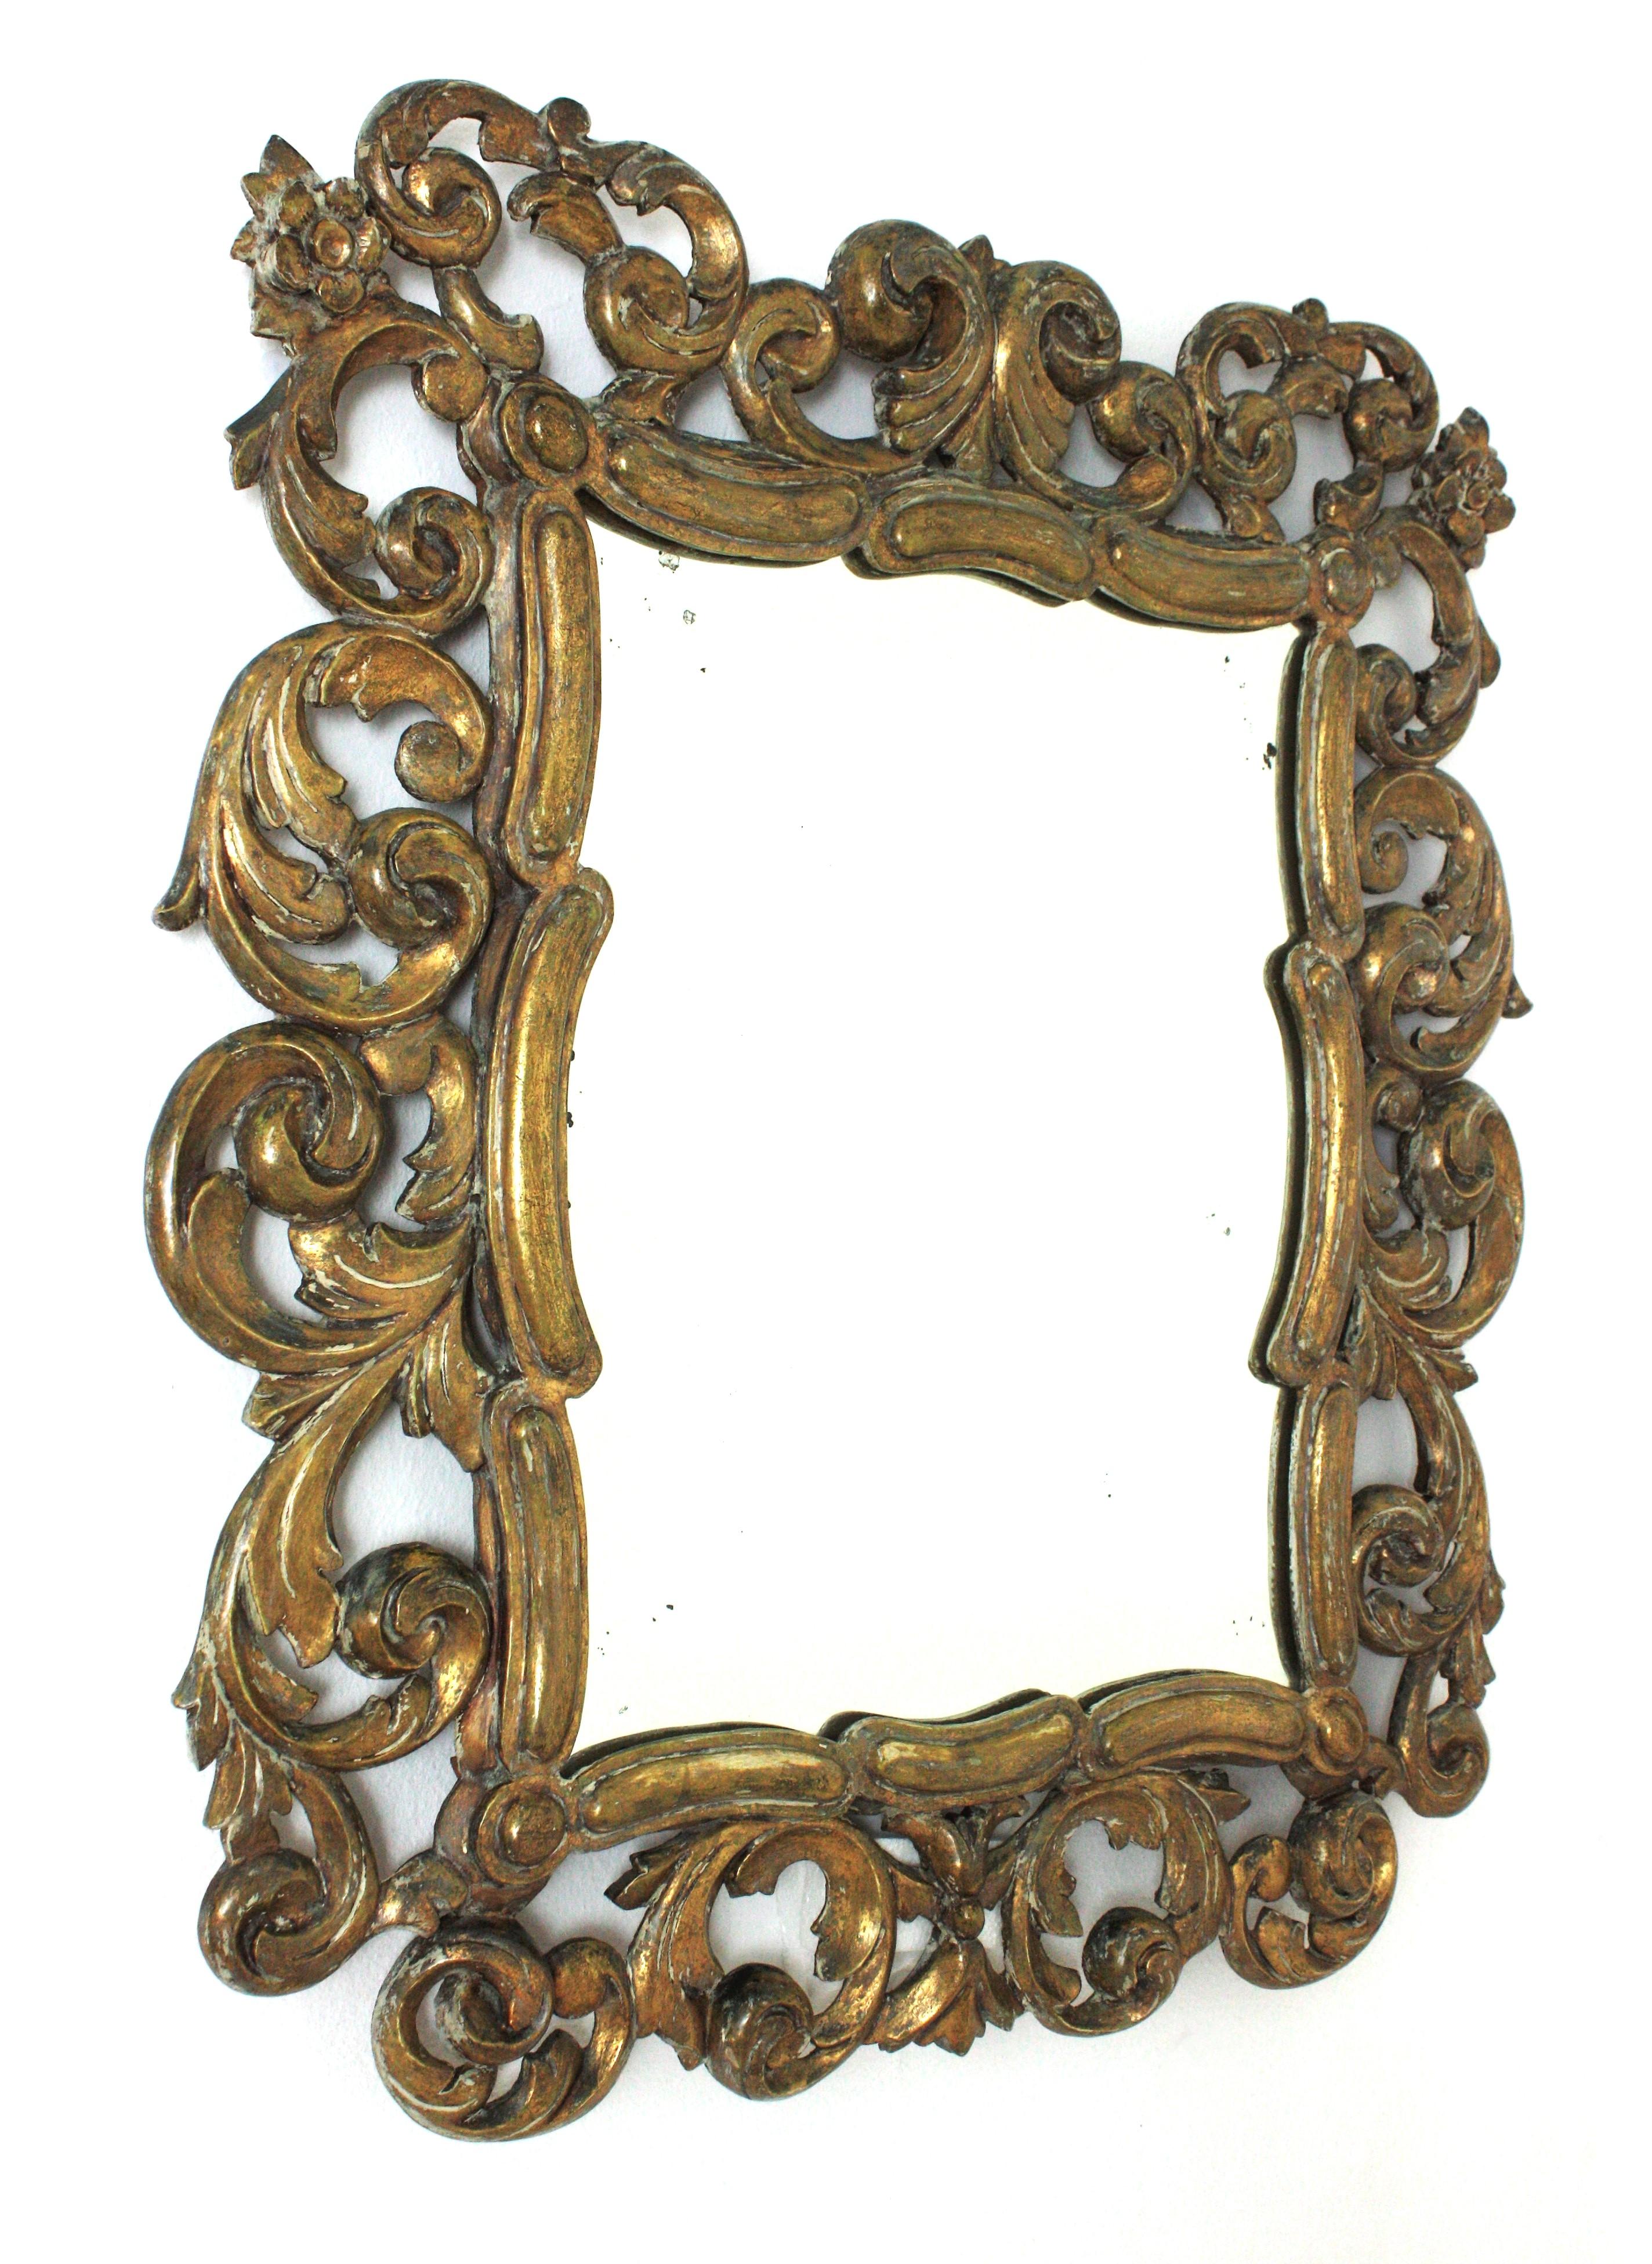 Spanish Foliage Gilt Carved Wood Mirror with Scroll Work Design In Good Condition For Sale In Barcelona, ES